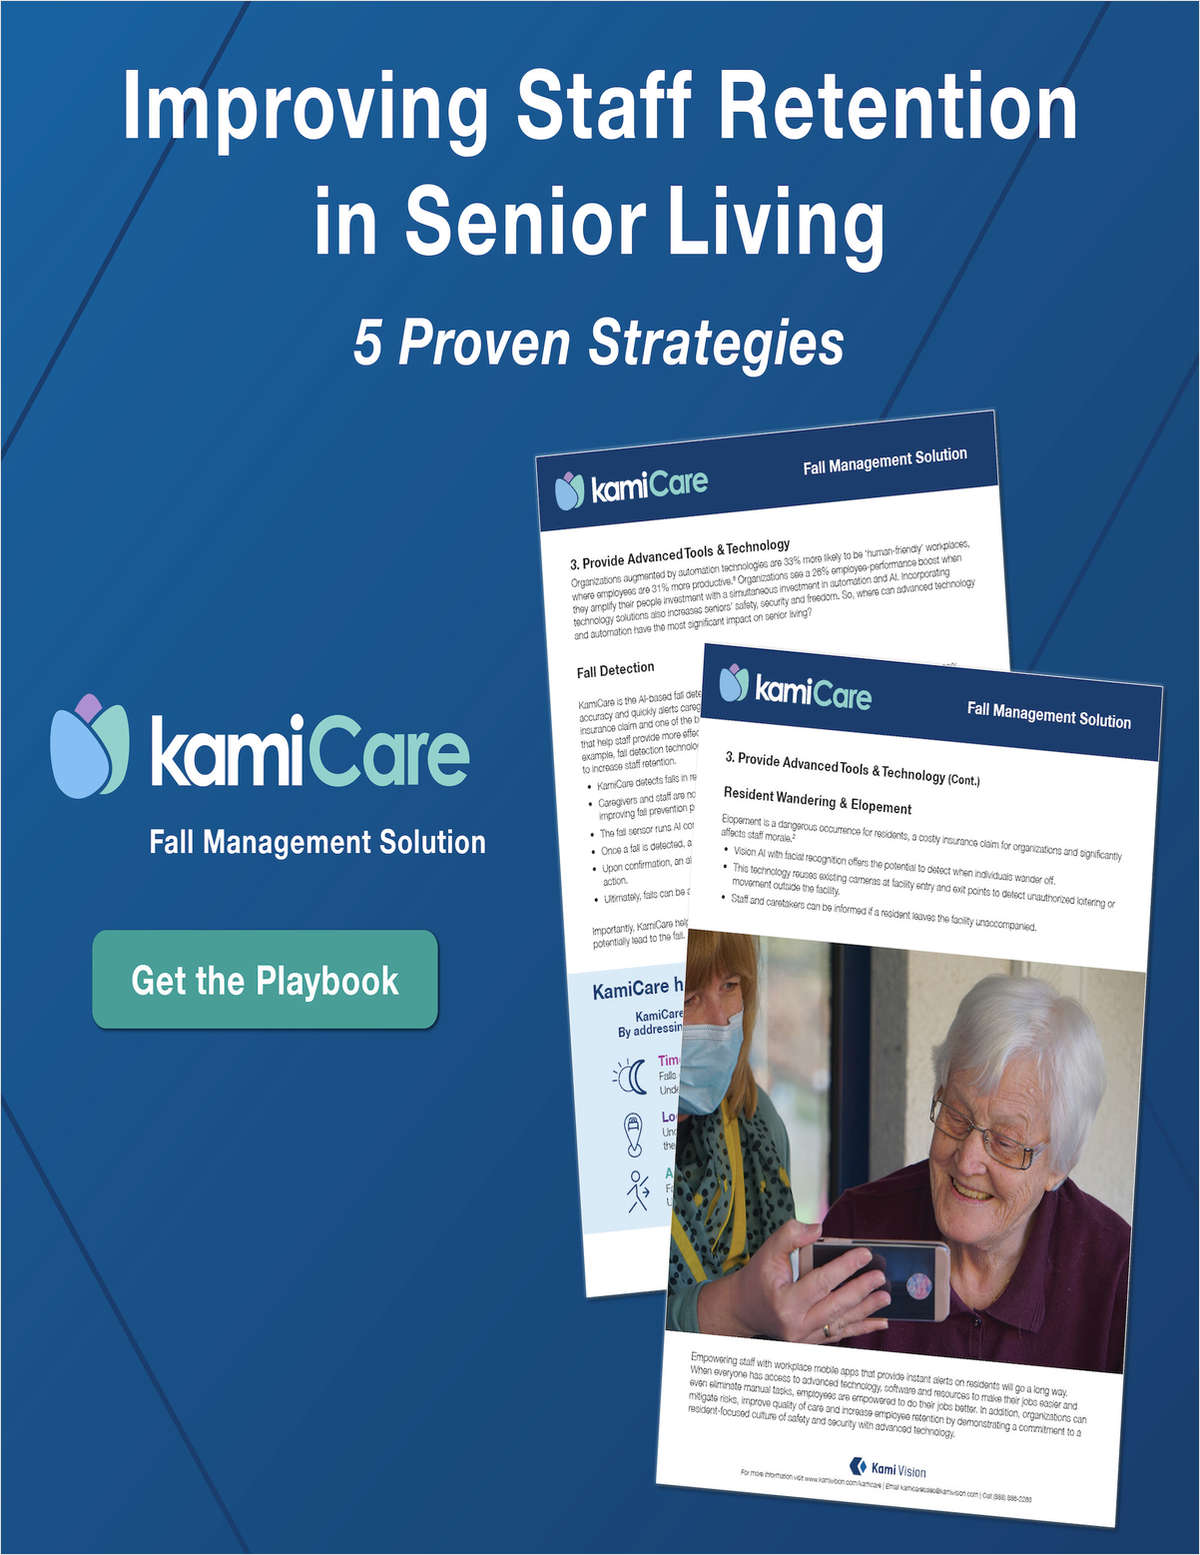 5 Proven Strategies to Increase Employee Retention and Reduce Operational Costs in Senior Living